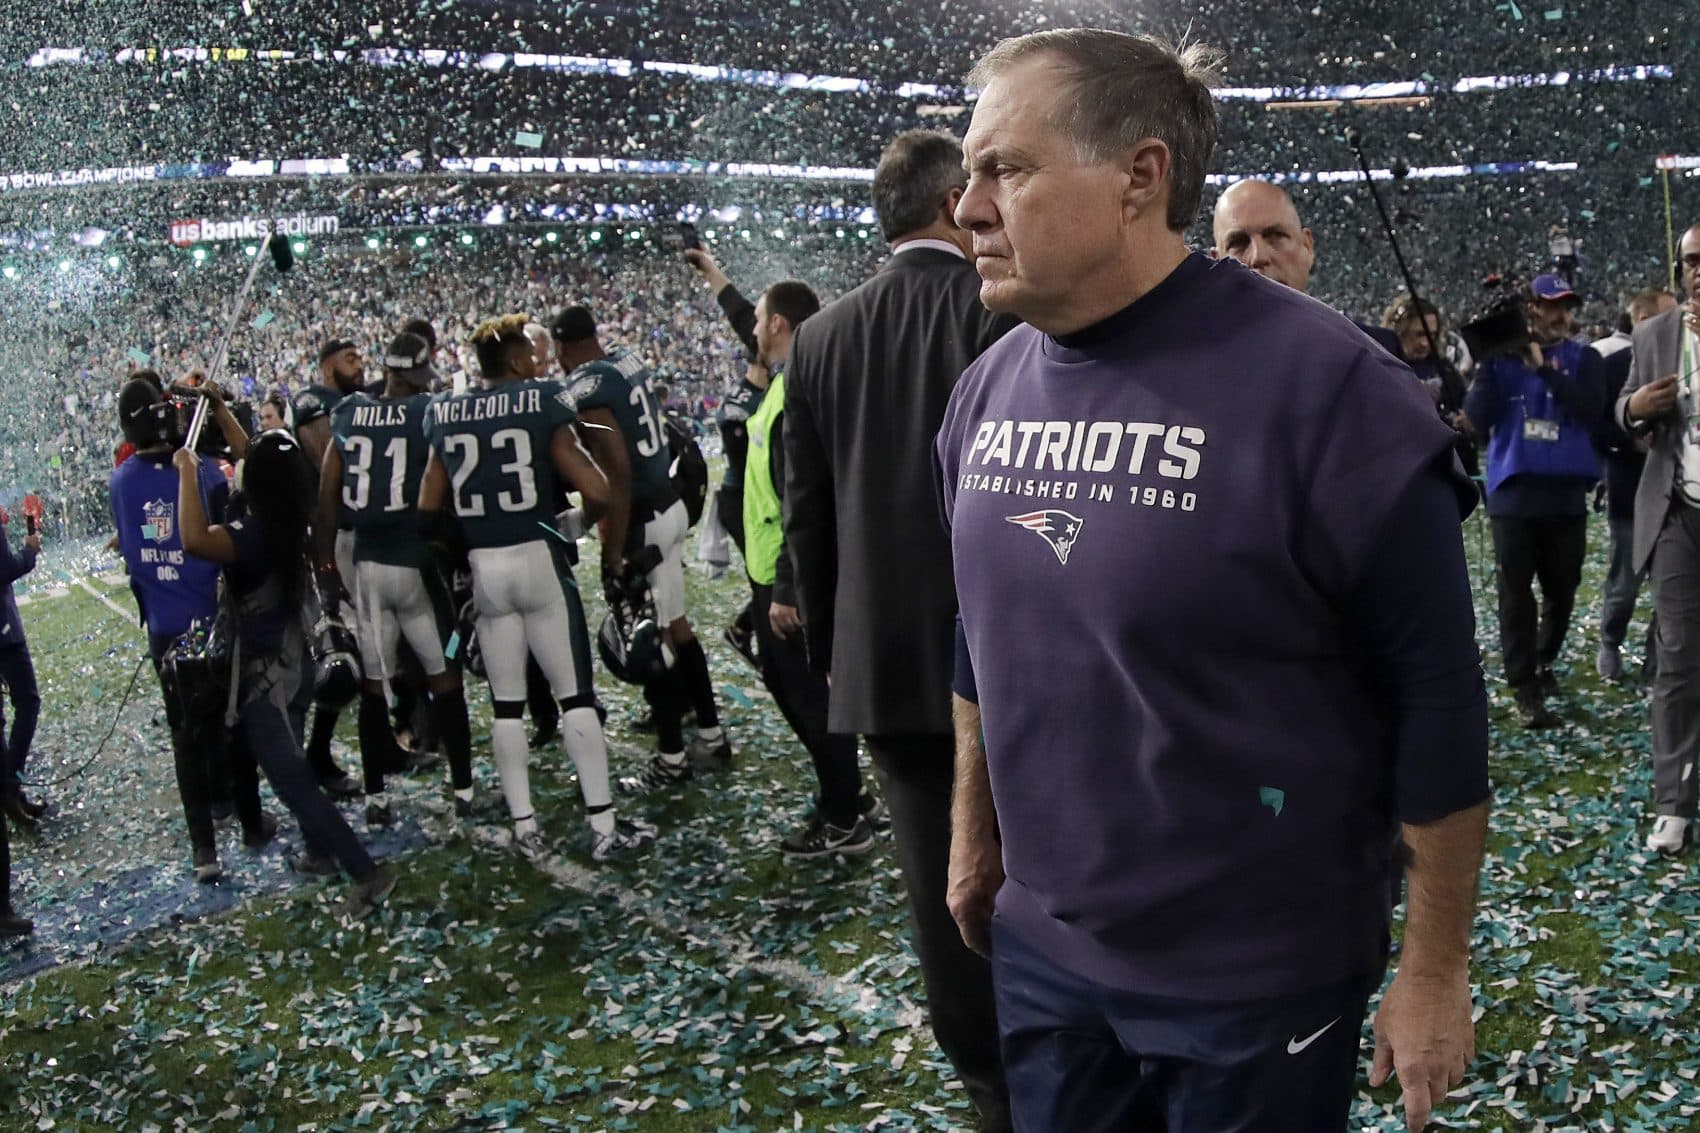 New England Patriots head coach Bill Belichick walks off the field after the NFL Super Bowl 52 football game against the Philadelphia Eagles Sunday, Feb. 4, 2018, in Minneapolis. The Eagles won 41-33. (AP Photo/Mark Humphrey)